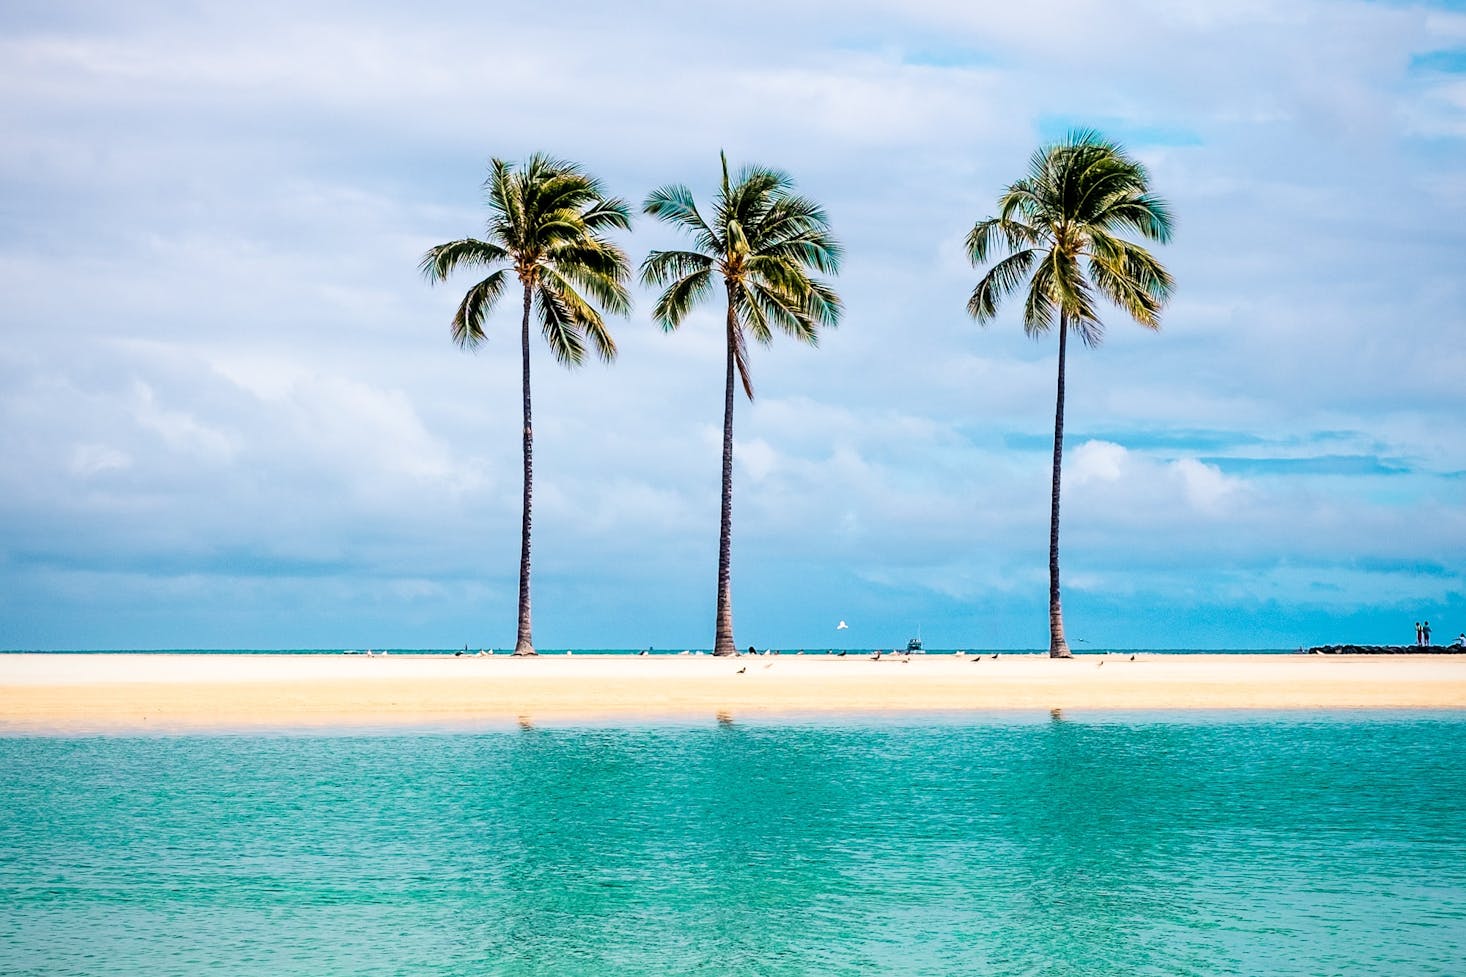 Palm trees on a beach in Hawaii